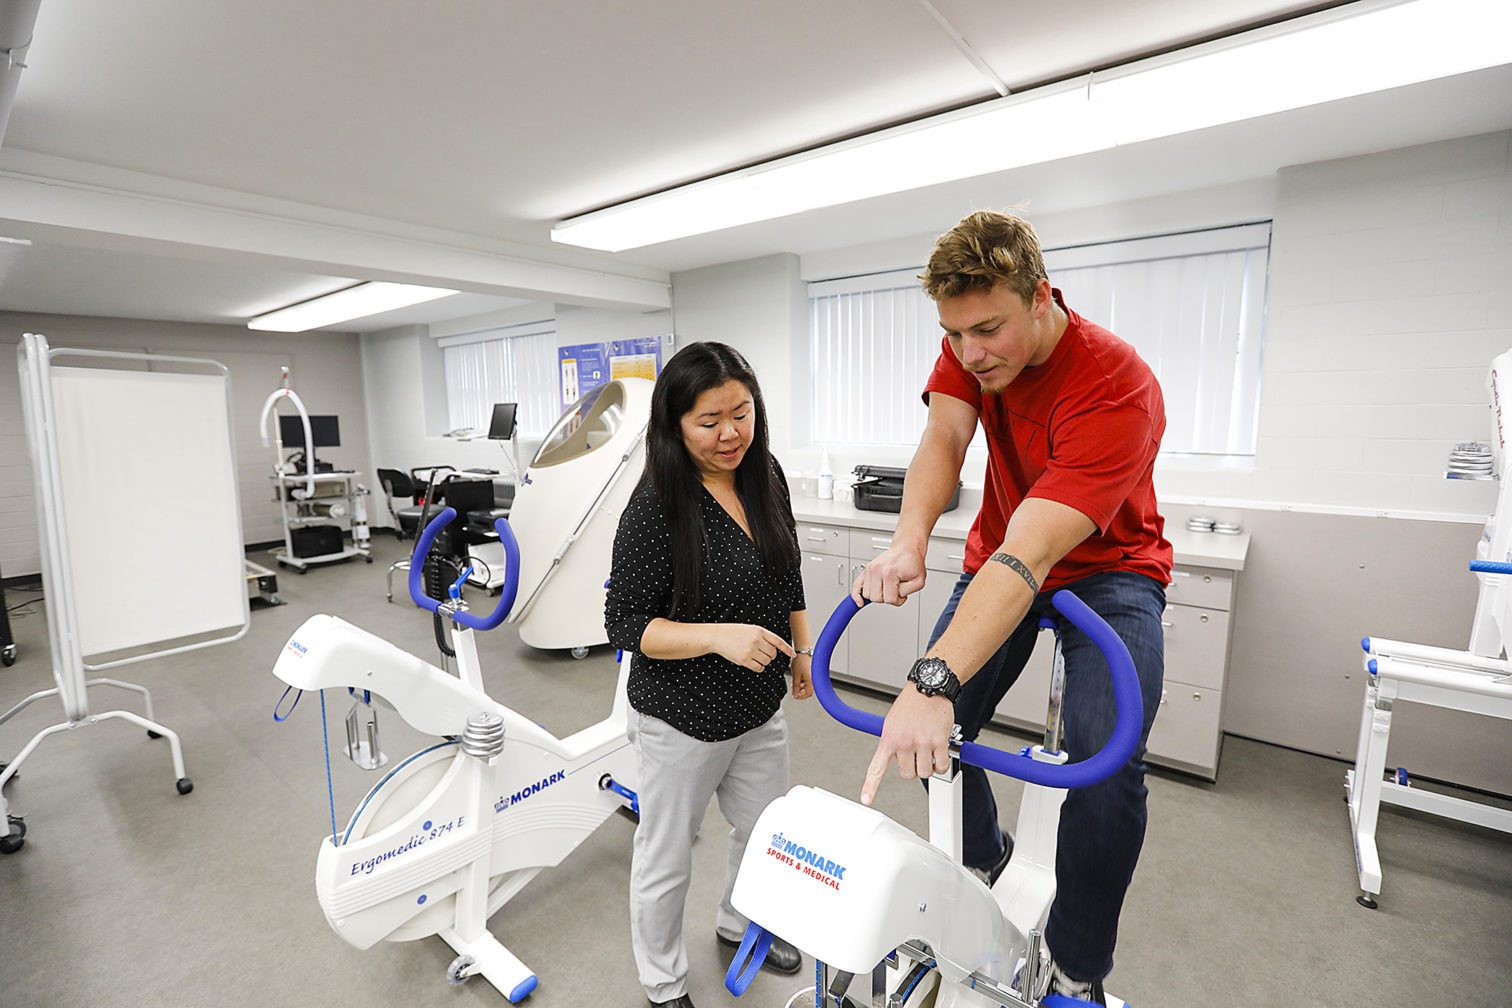 Dr. Berrios and a student in the exercise science lab.